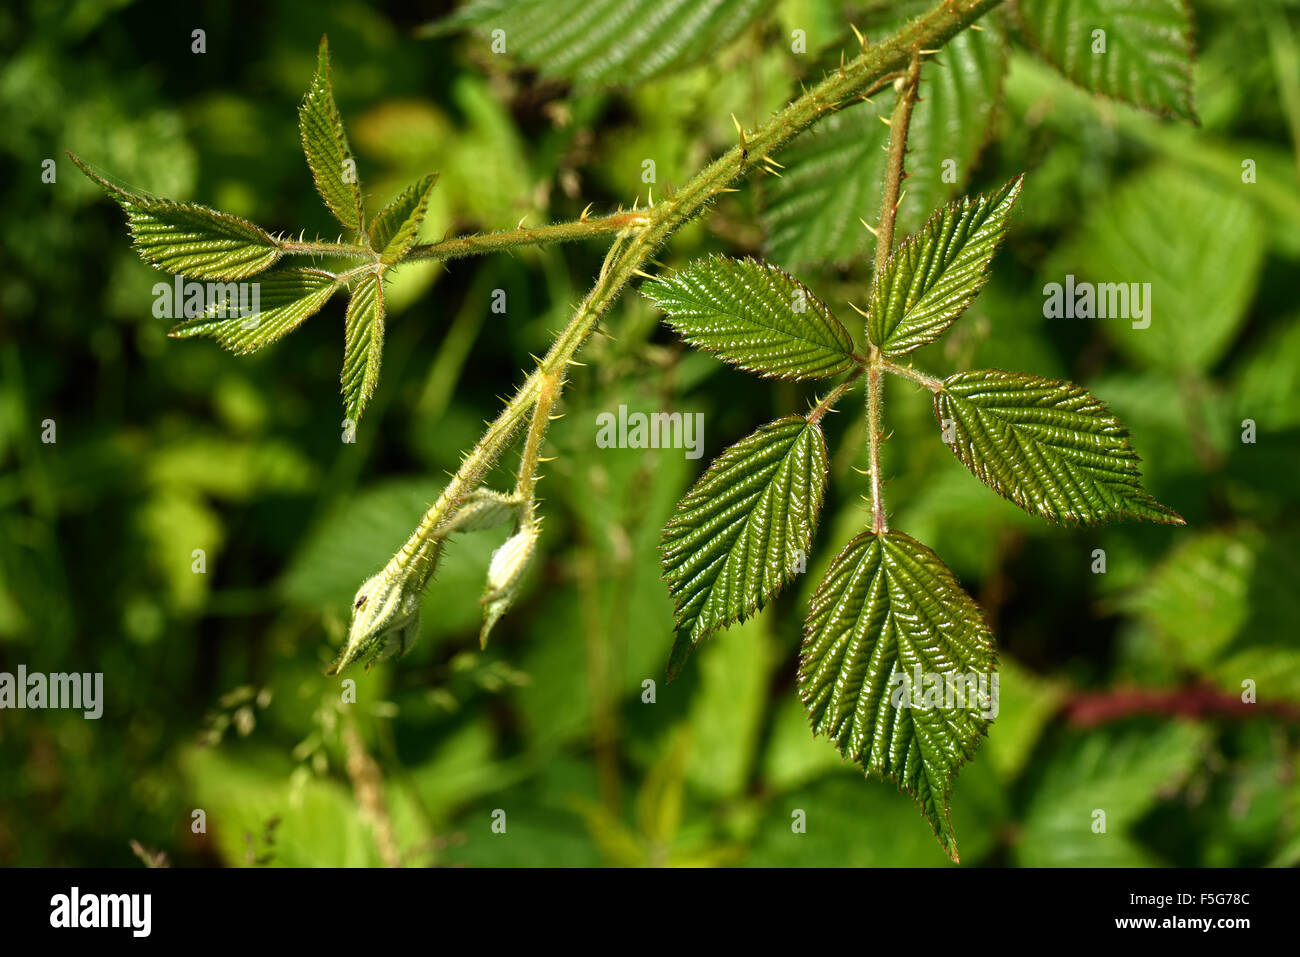 Growing point apex of a rambling bramble or blackberry, Rubus fruticosus, shoot with young leaves, June Stock Photo